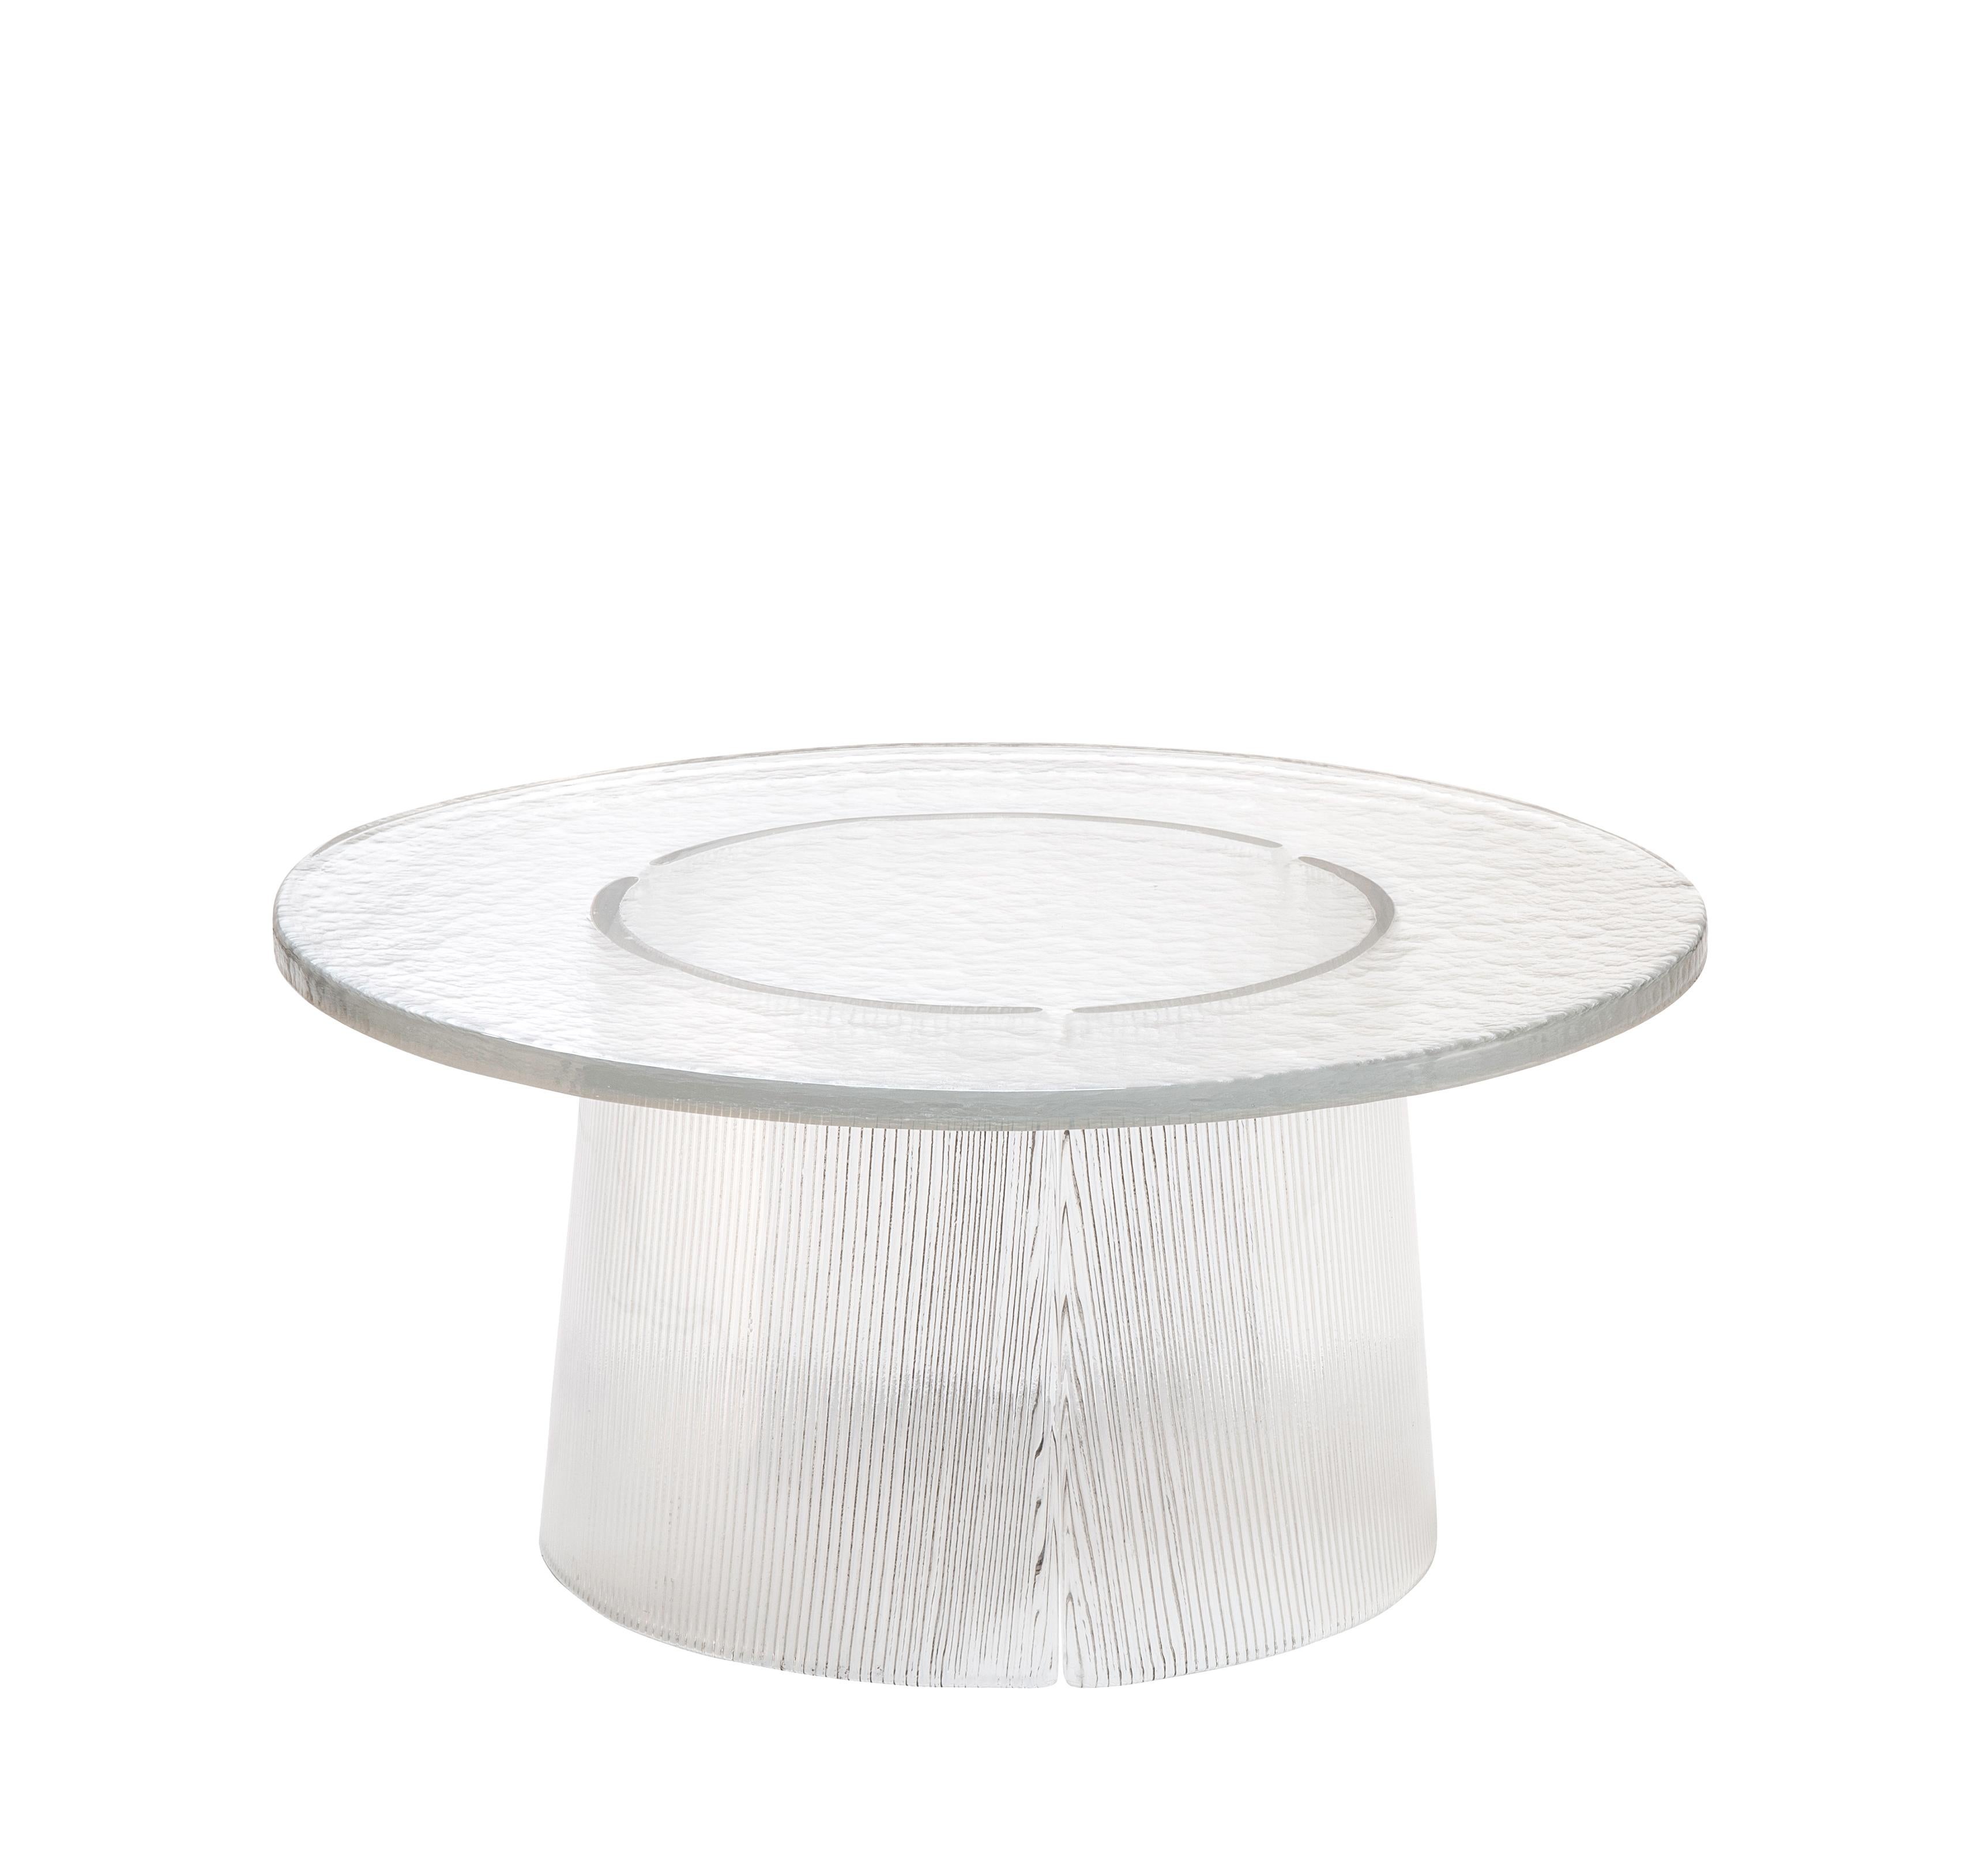 Bent side table big transparent by Pulpo.
Dimensions: D75 x H35 cm.
Materials: casted glass.

Also available in different finishes and dimensions. 

The bubbled surface of the cast glass table top dances against with the smooth lines of the